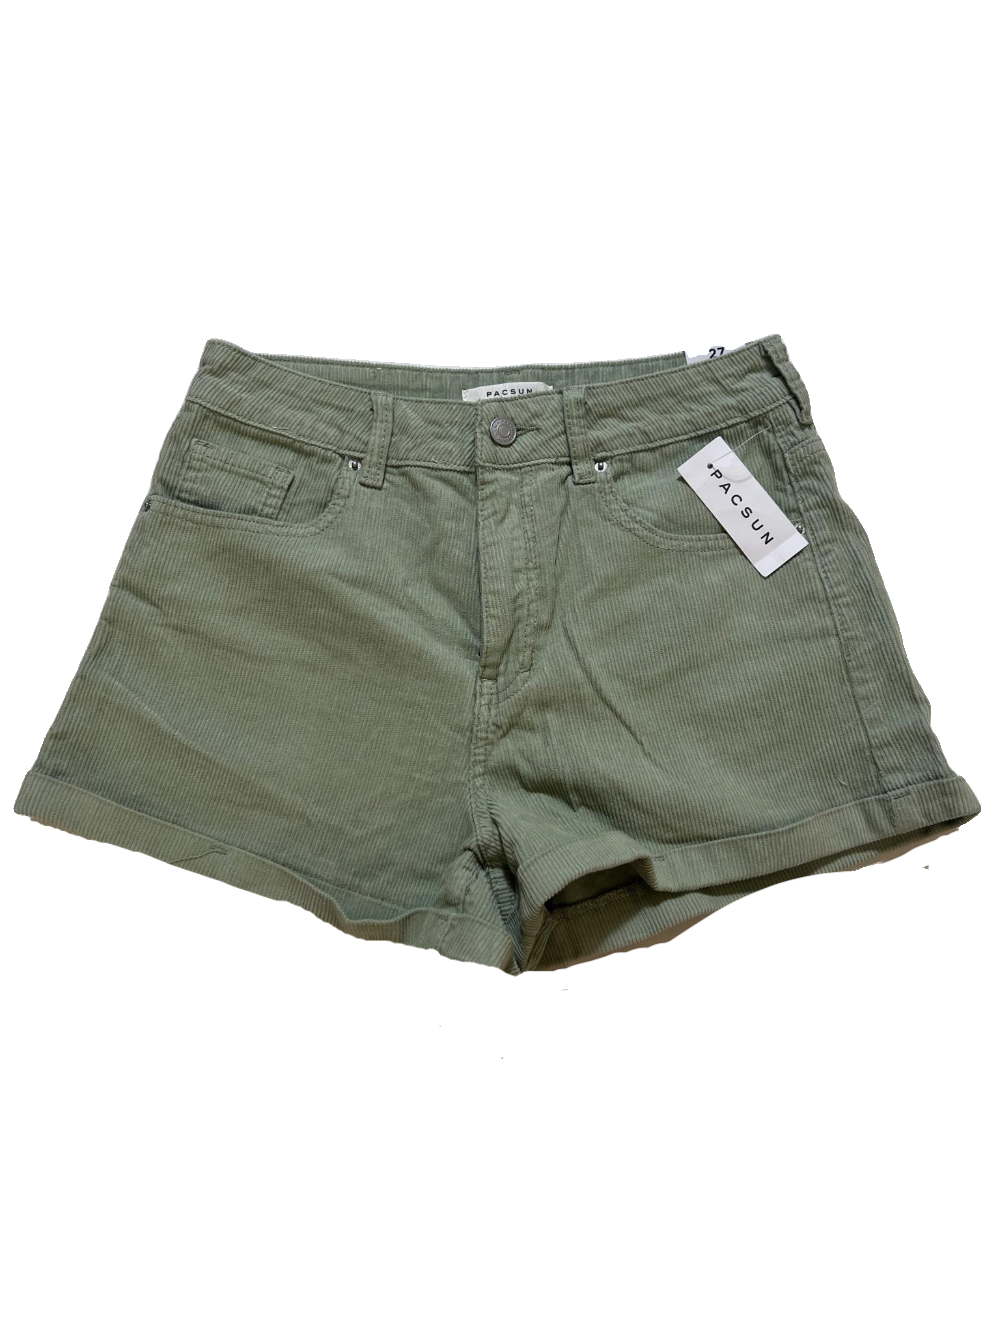 Pacsun- Green Shorts NEW WITH TAGS!